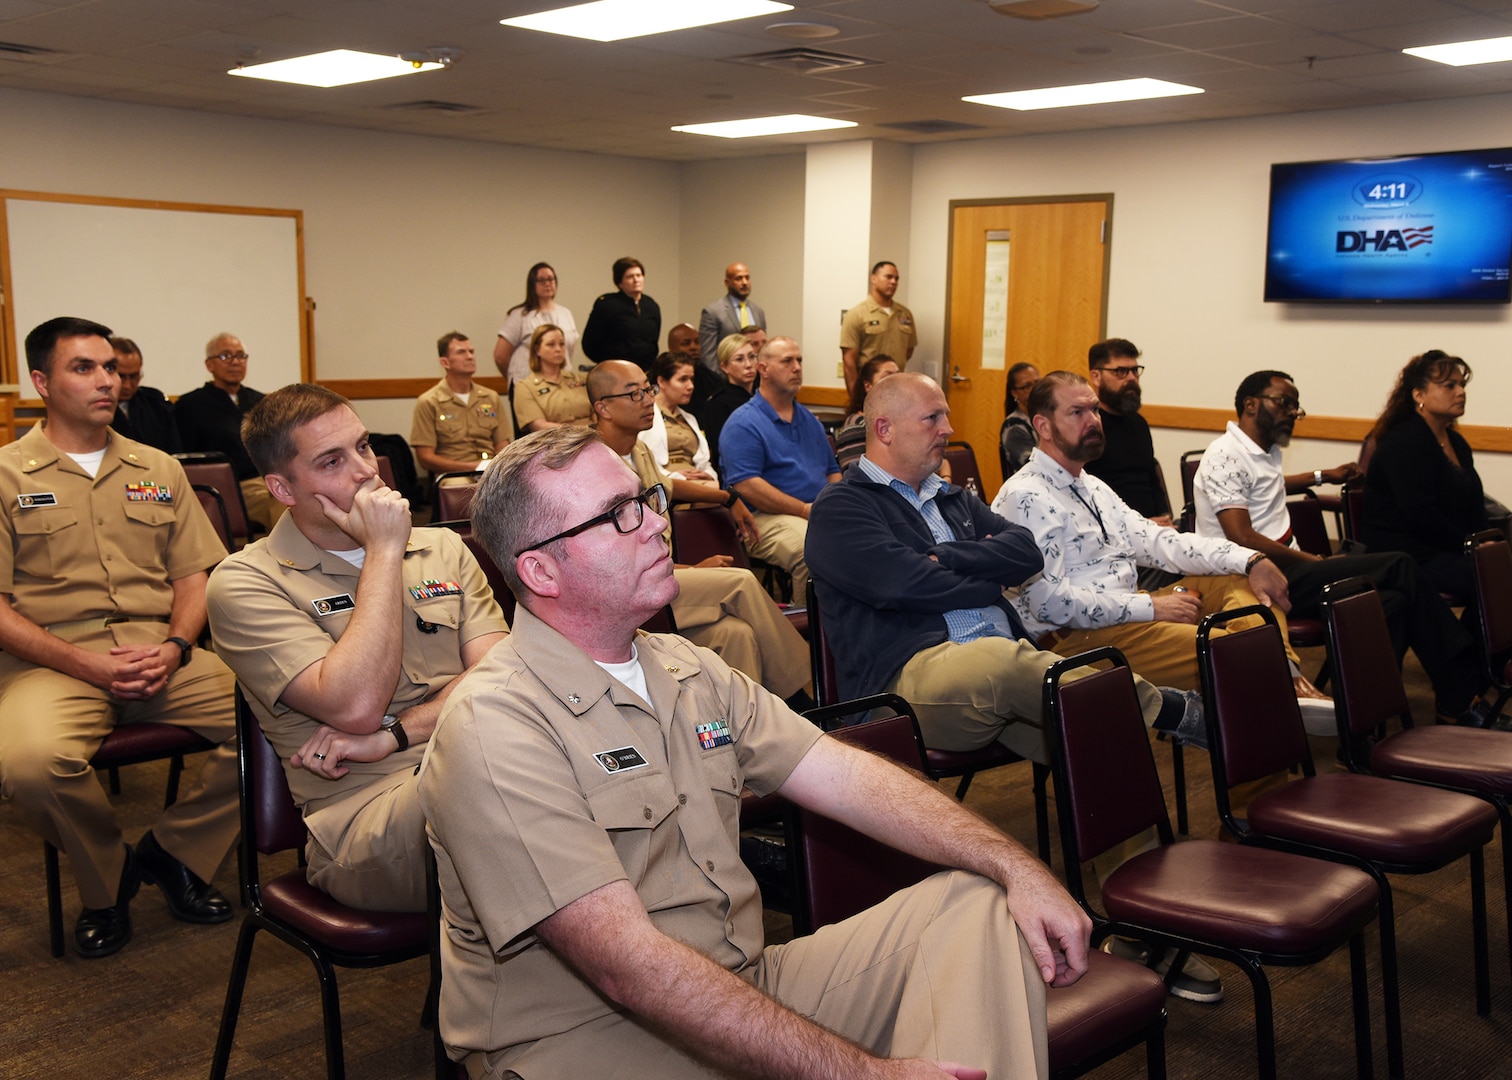 JOINT BASE SAN ANTONIO-FORT SAM HOUSTON – (March 6, 2024) – Program managers assigned to Naval Medical Research Unit (NAMRU) San Antonio attend the outbrief of the U.S. Navy’s Bureau of Medicine and Surgery (BUMED) Medical Inspector General, Capt. William Deniston at the Battlefield Health and Trauma Research Institute. Approximately 12 inspectors conducted evaluations of 40 programs and collateral duties over three days at Naval Medical Research Unit (NAMRU) San Antonio to improve command performance and processes. NAMRU San Antonio’s mission is to conduct gap driven combat casualty care, craniofacial, and directed energy research to improve survival, operational readiness, and safety of DoD personnel engaged in routine and expeditionary operations. It is one of the leading research and development laboratories for the U.S. Navy under the DoD and is one of eight subordinate research commands in the global network of laboratories operating under the Naval Medical Research Command in Silver Spring, Md. (U.S. Navy photo by Burrell Parmer, NAMRU San Antonio Public Affairs/Released)